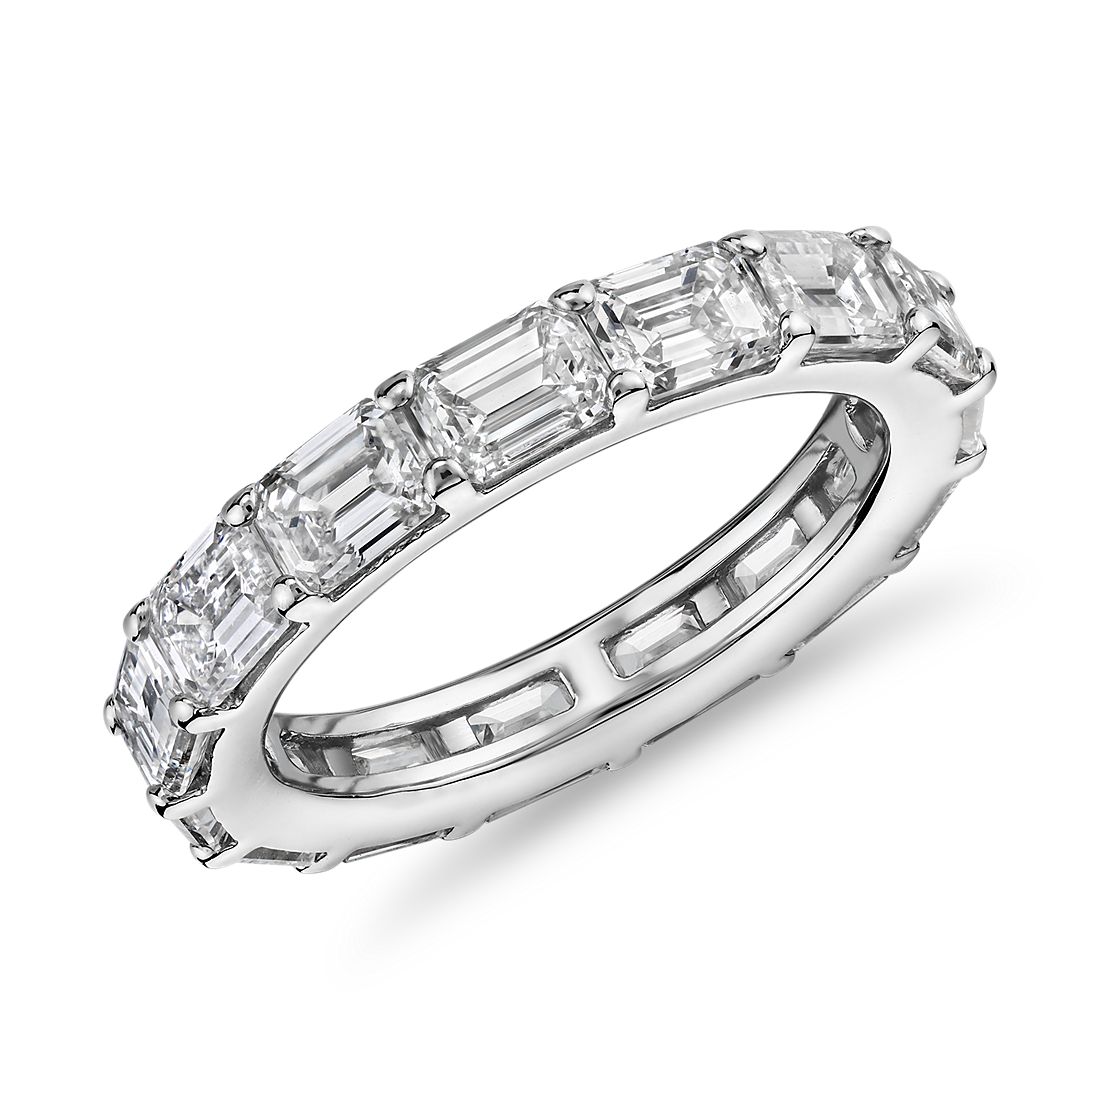 The Gallery Collection East-West Emerald Cut Diamond Eternity Ring in Platinum (4.5 ct. tw.)